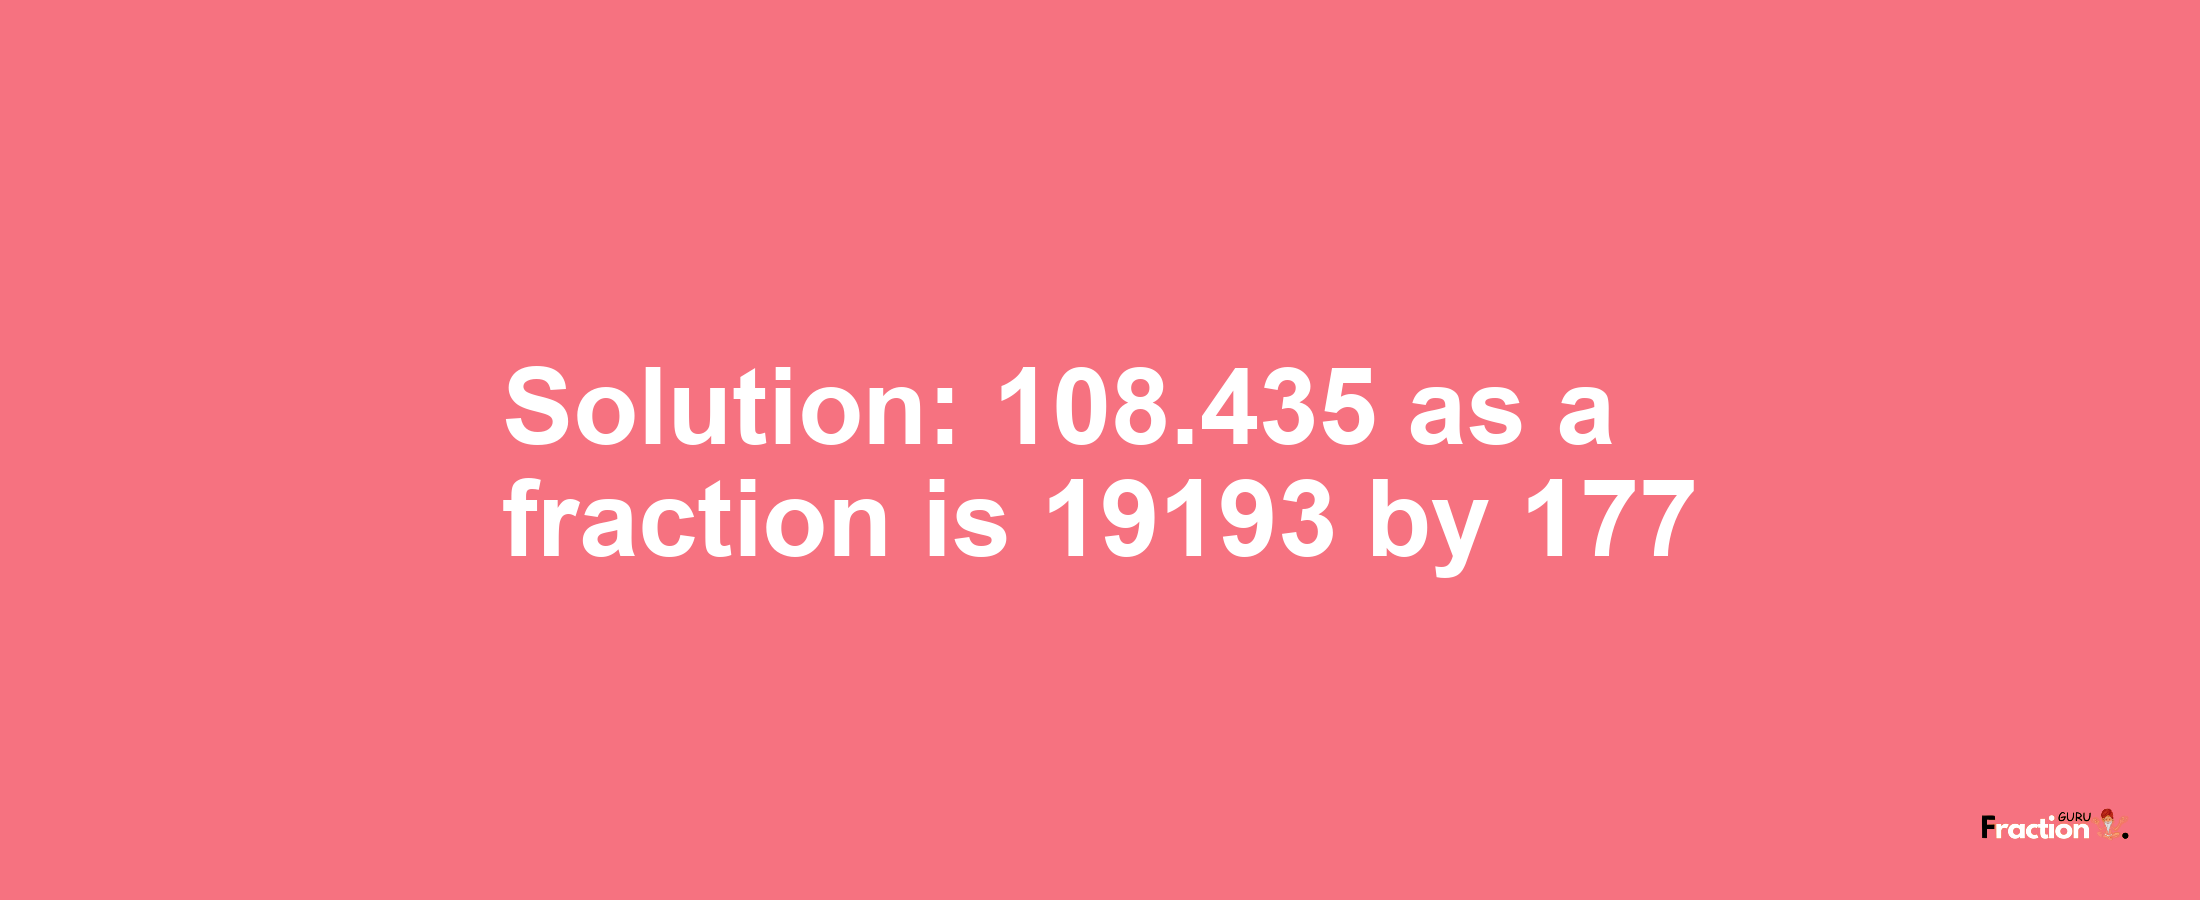 Solution:108.435 as a fraction is 19193/177